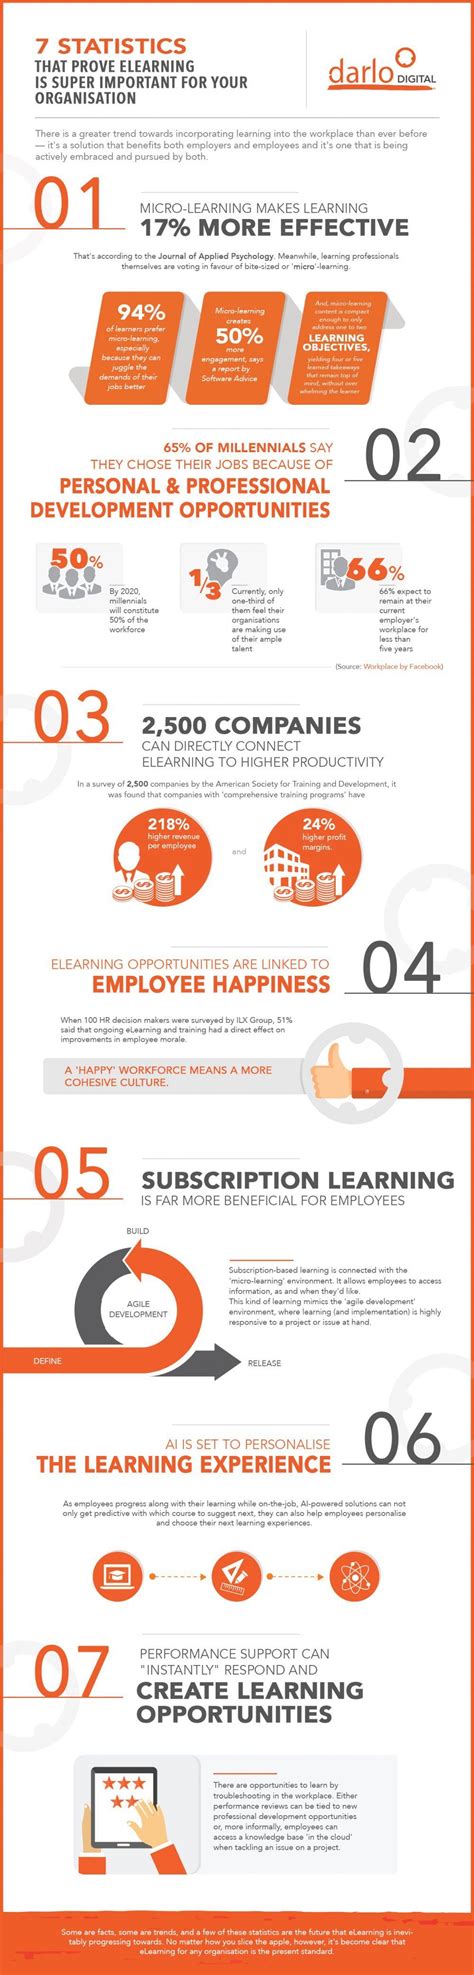 7 Statistics That Prove Elearning Is Super Important For Your